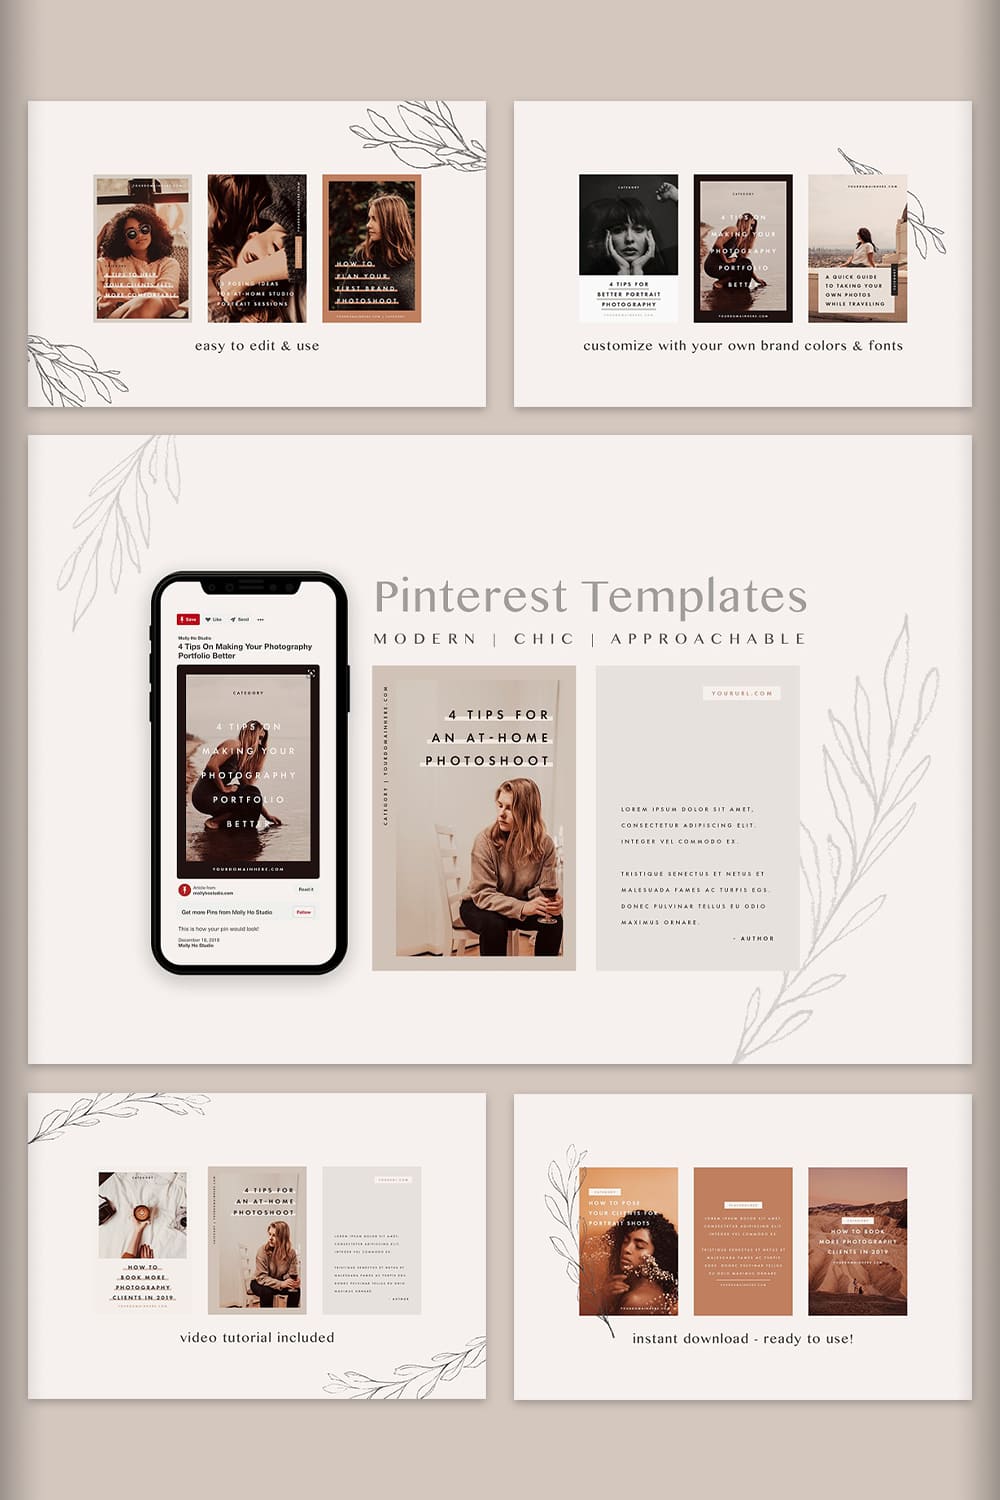 Pinterest Templates - "Easy To Edit & Use".